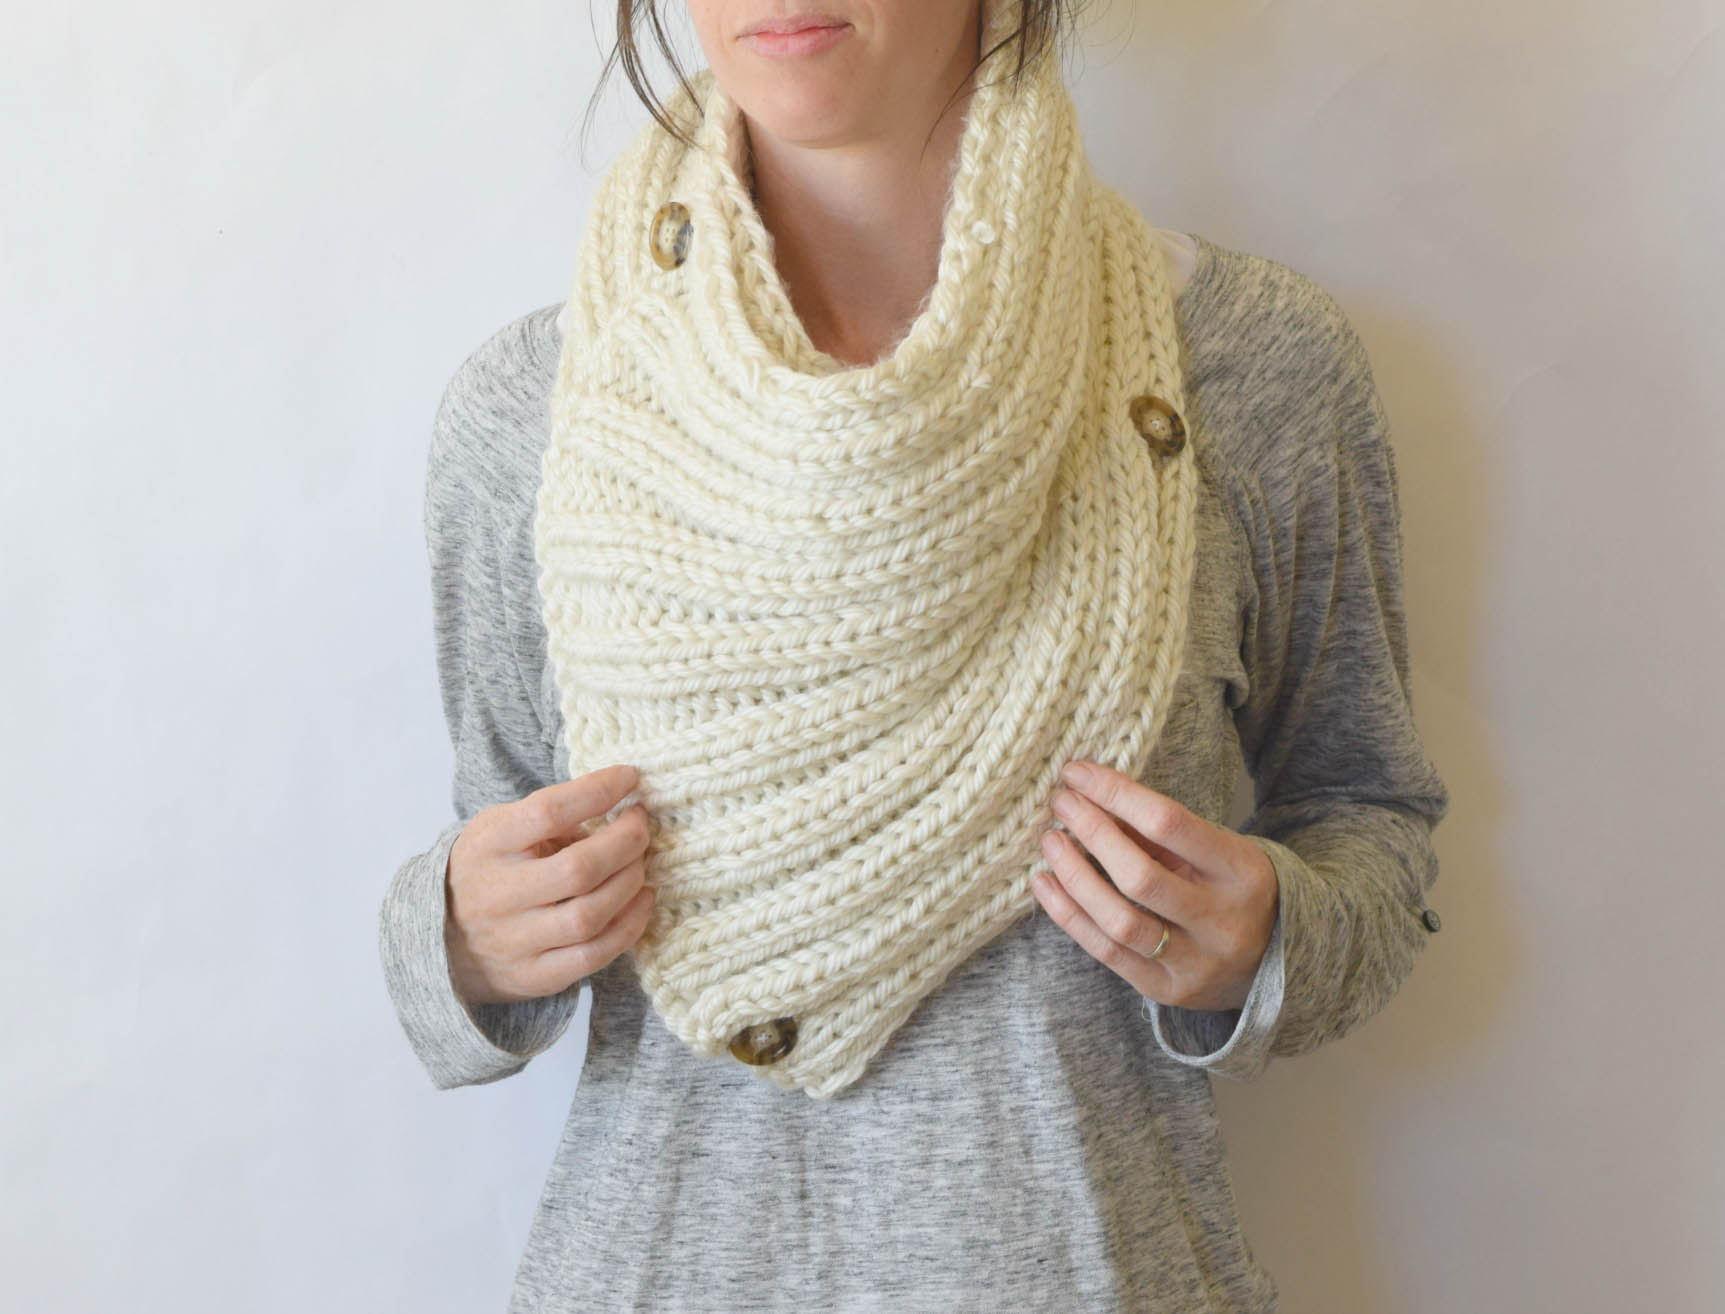 Simple Ribbed Cowl (Neck Warmer) Free Knitting Pattern for Beginners